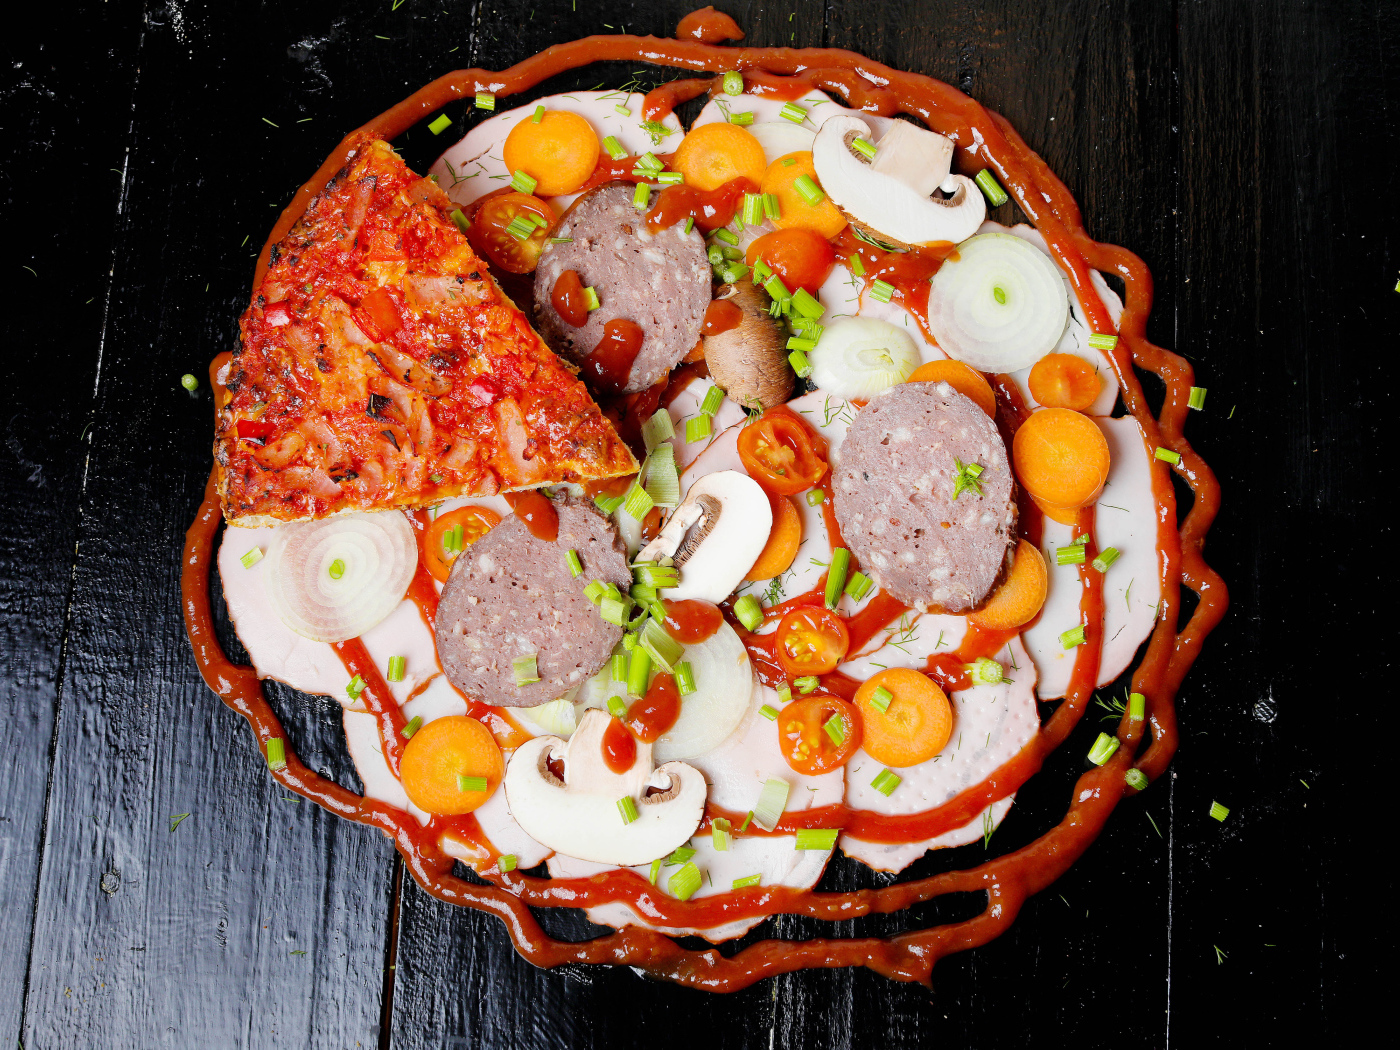 Pizza with vegetables and sausage on a table with ketchup